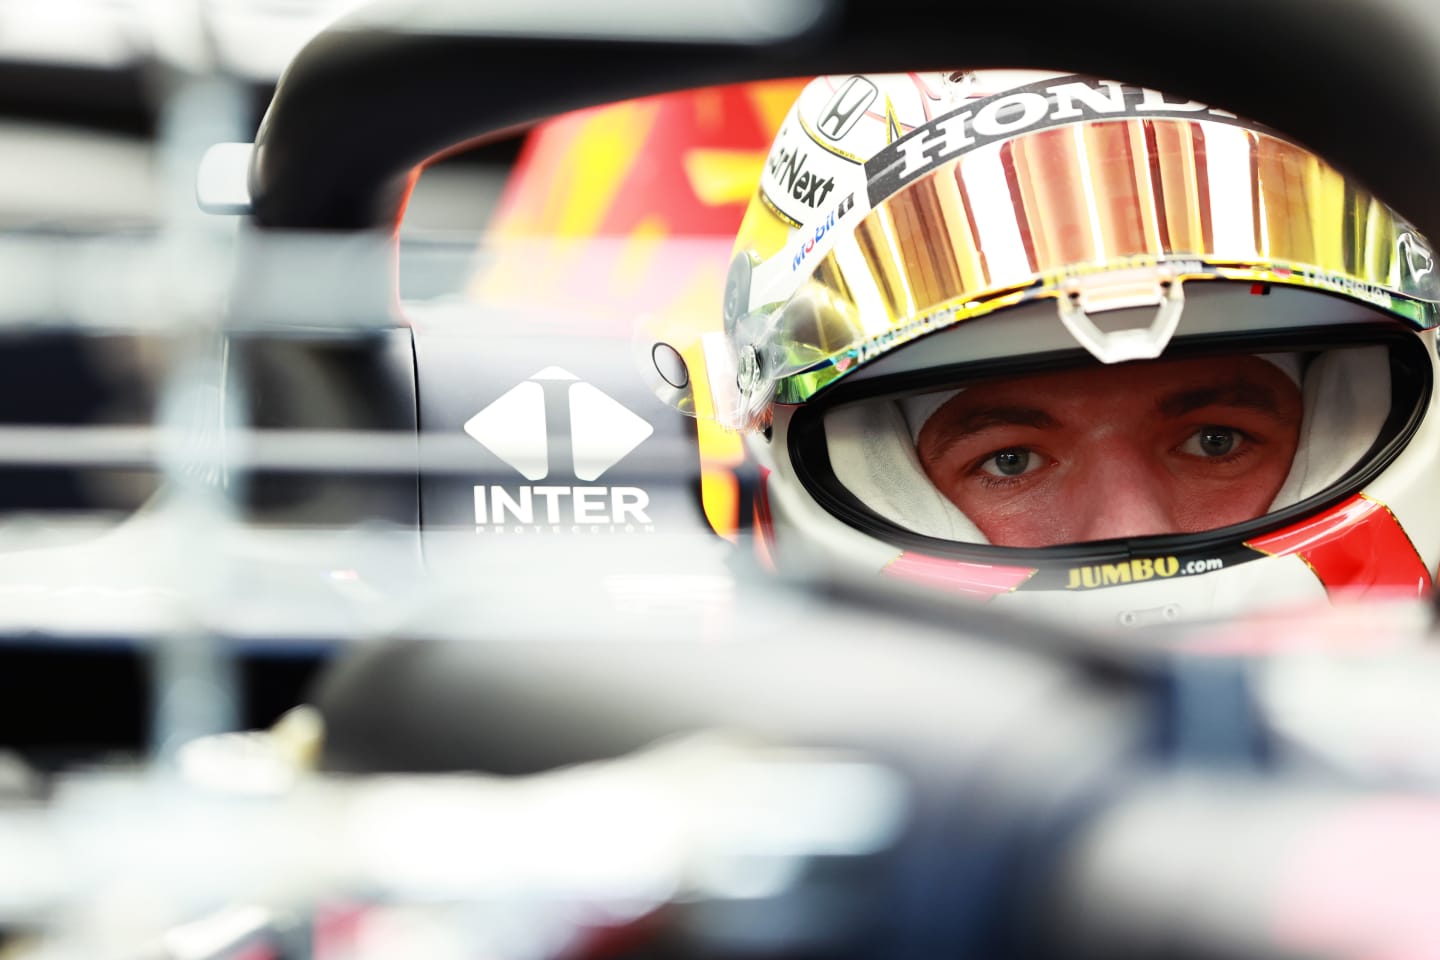 Max Verstappen deep in concentration as he prepares to leave the pits in his Red Bull RB16B